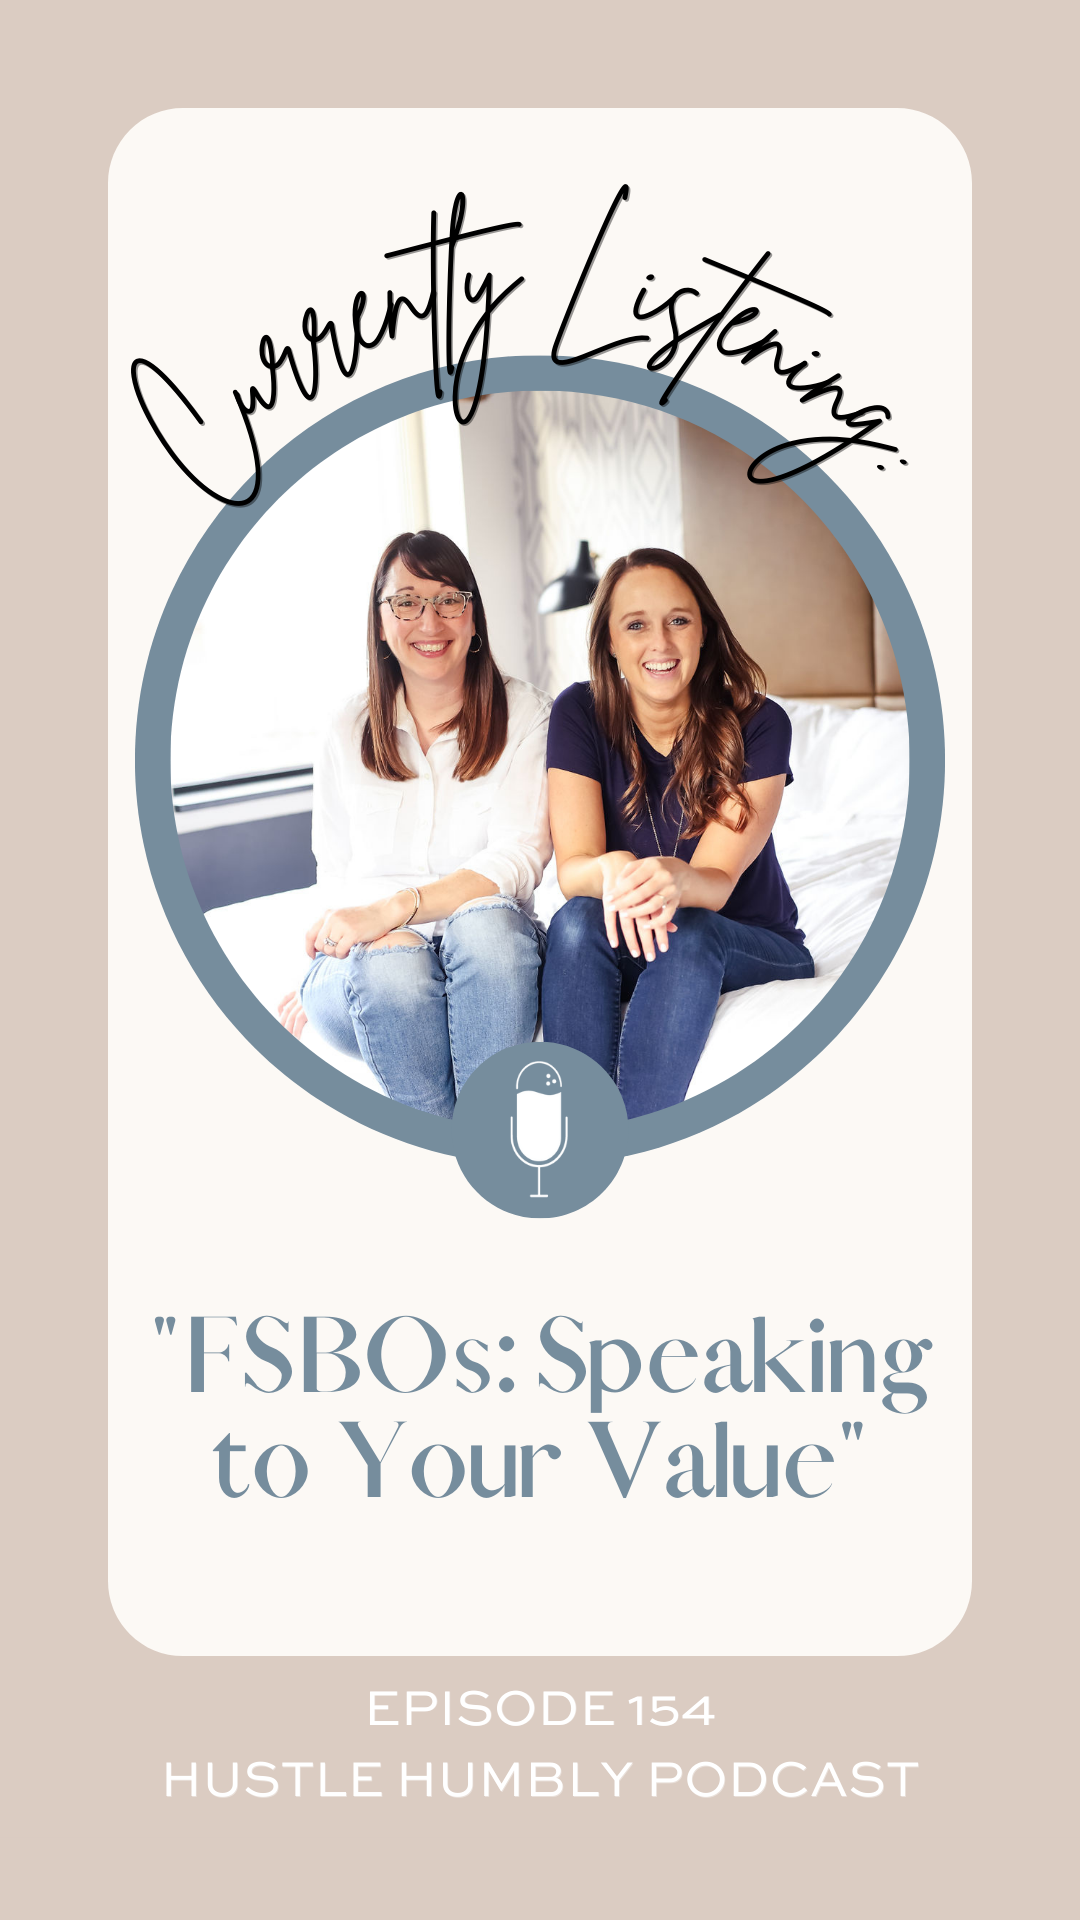 Hustle Humbly Podcast Episode 154: FSBOs: Speaking to Your Value